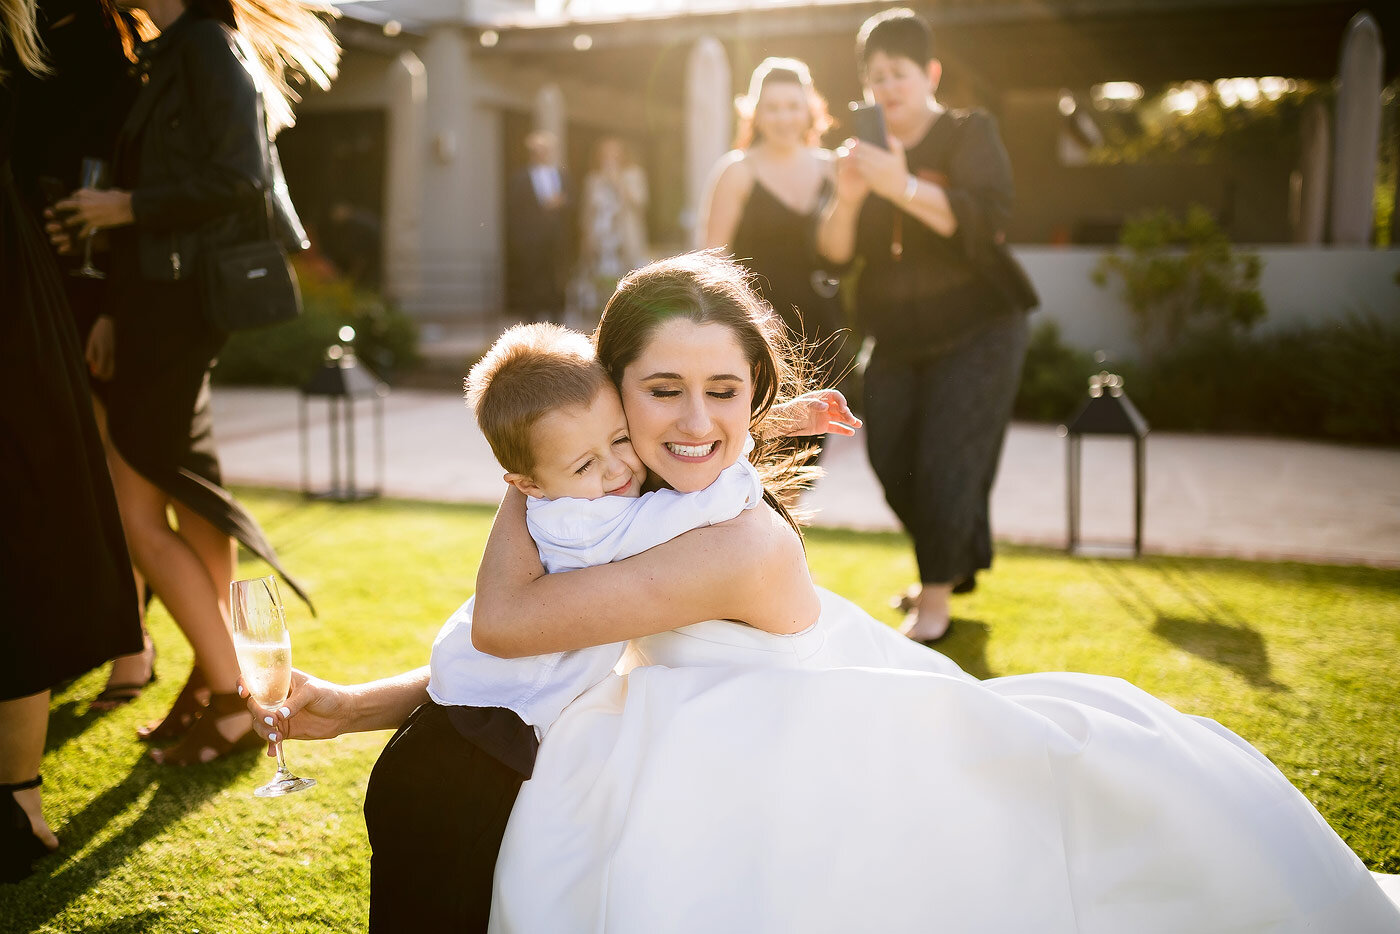 Bride embraces her son at the wedding reception.